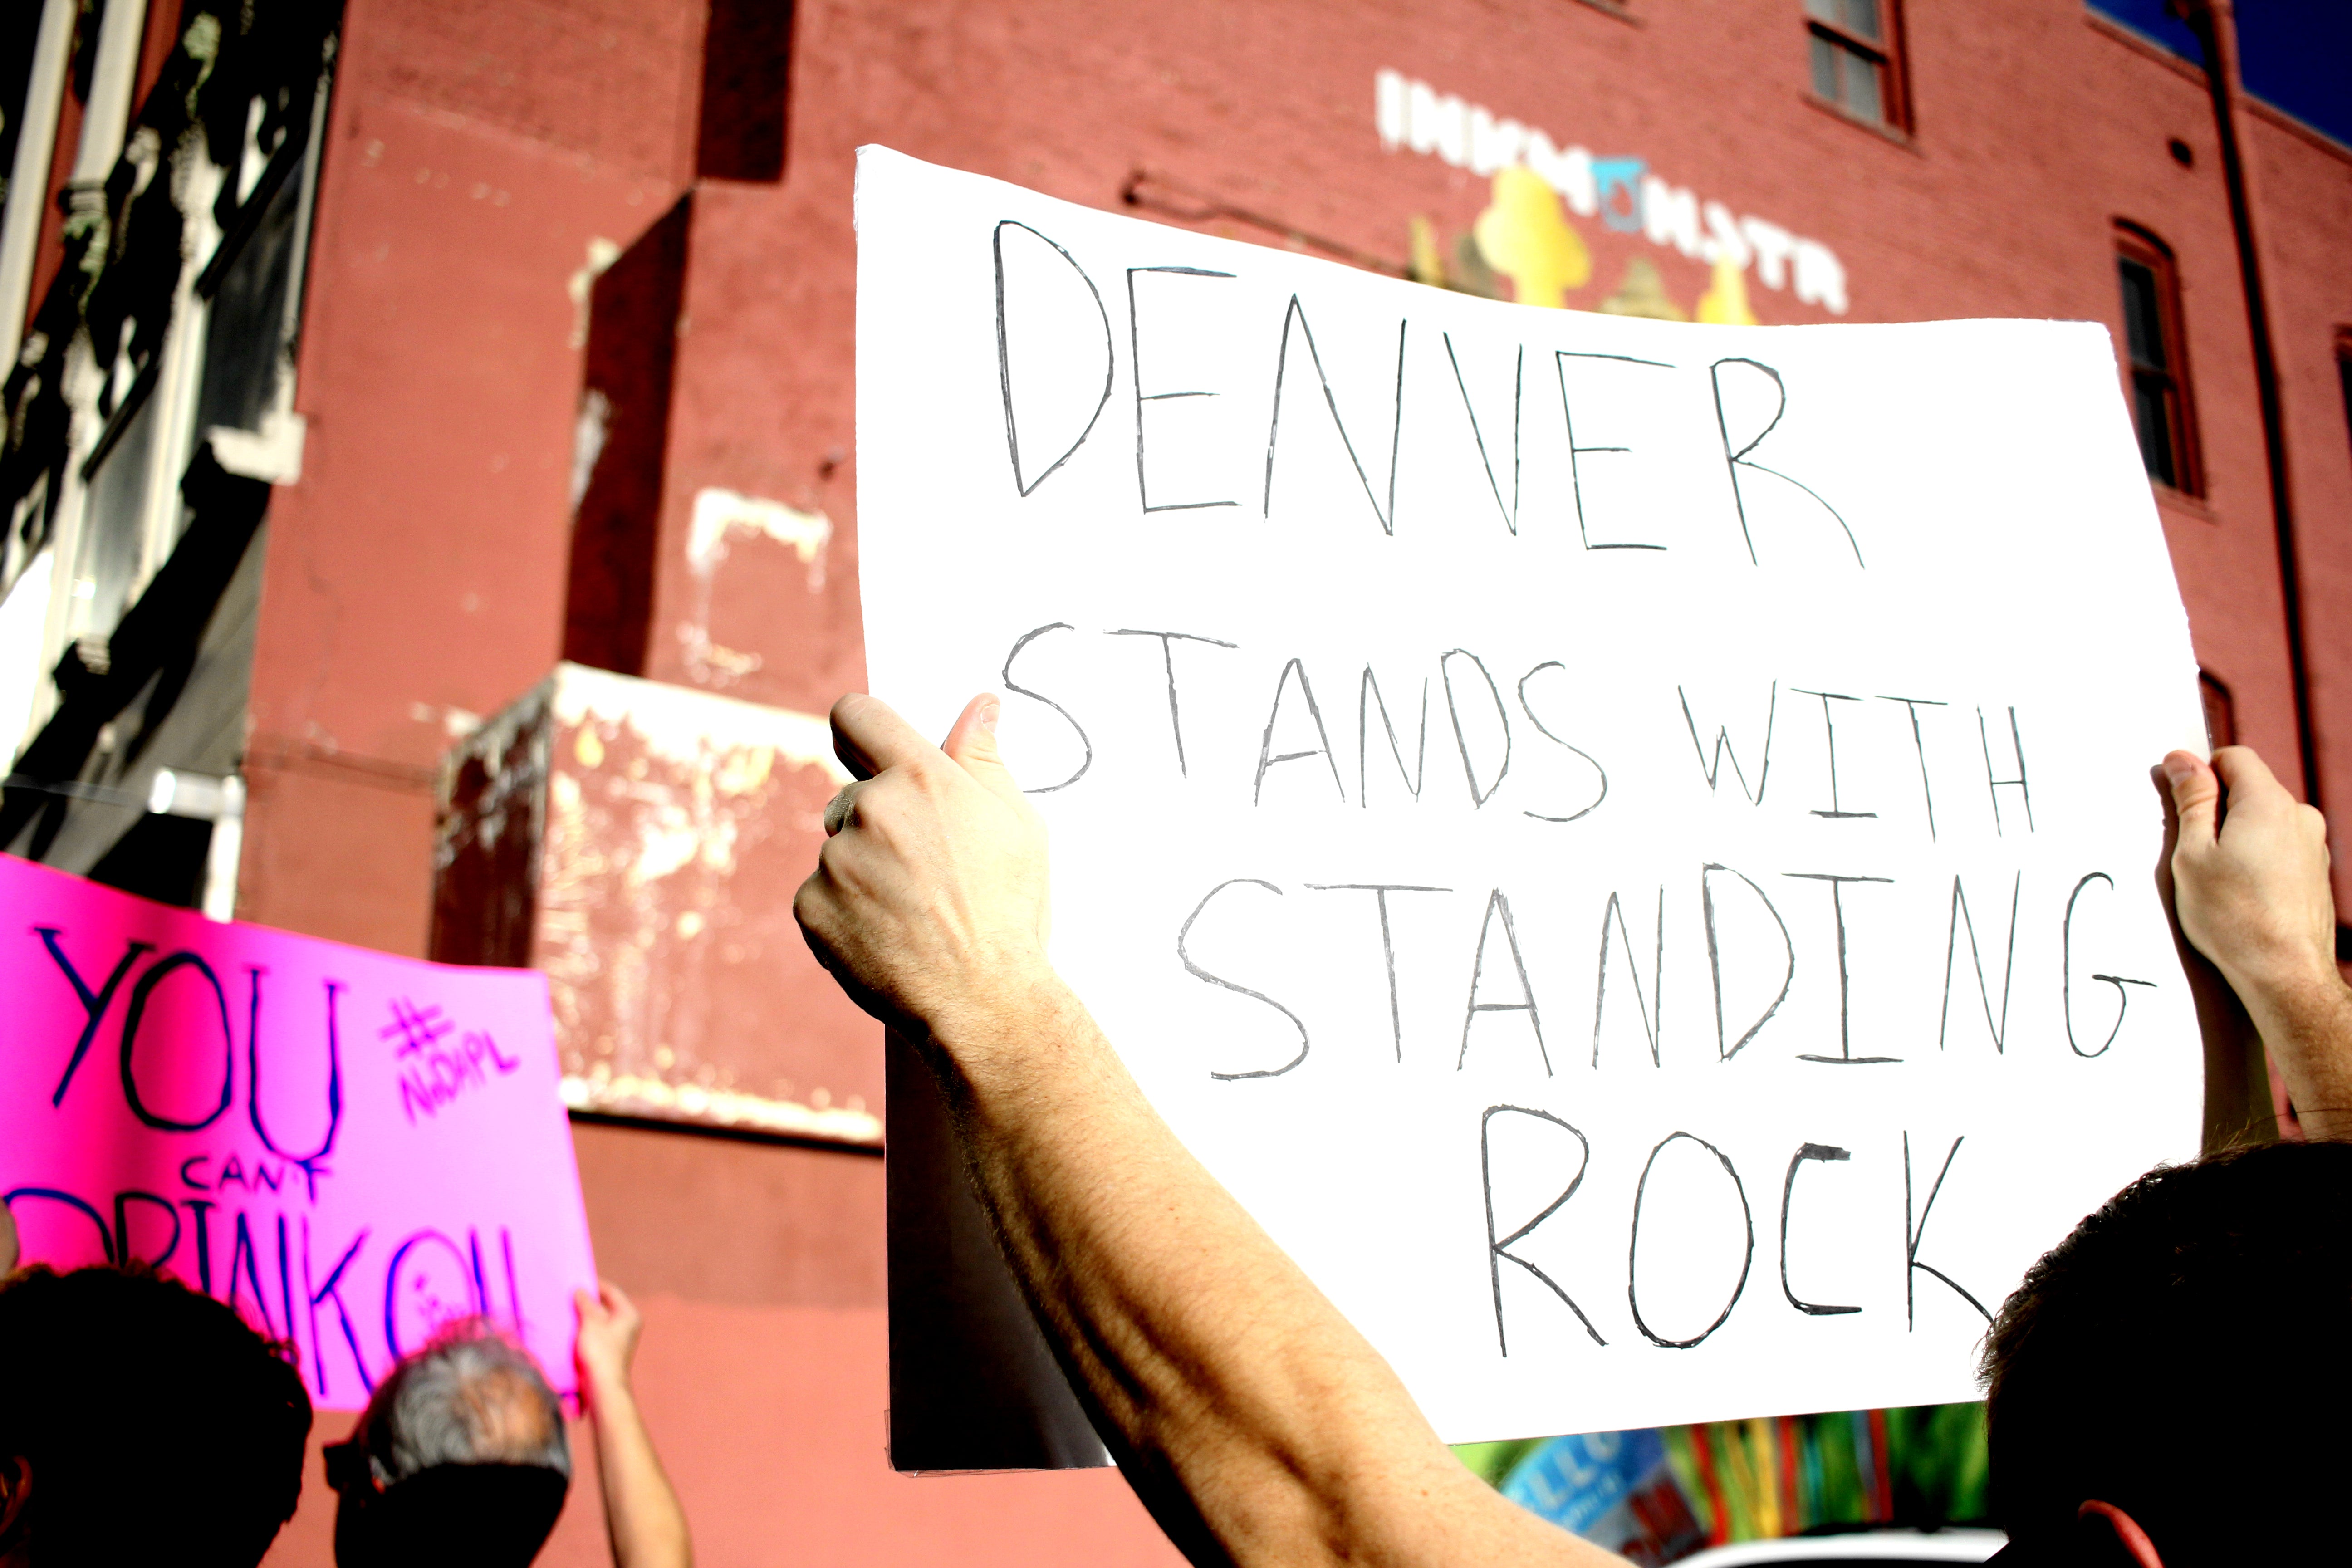 Denver Stands with Standing Rock